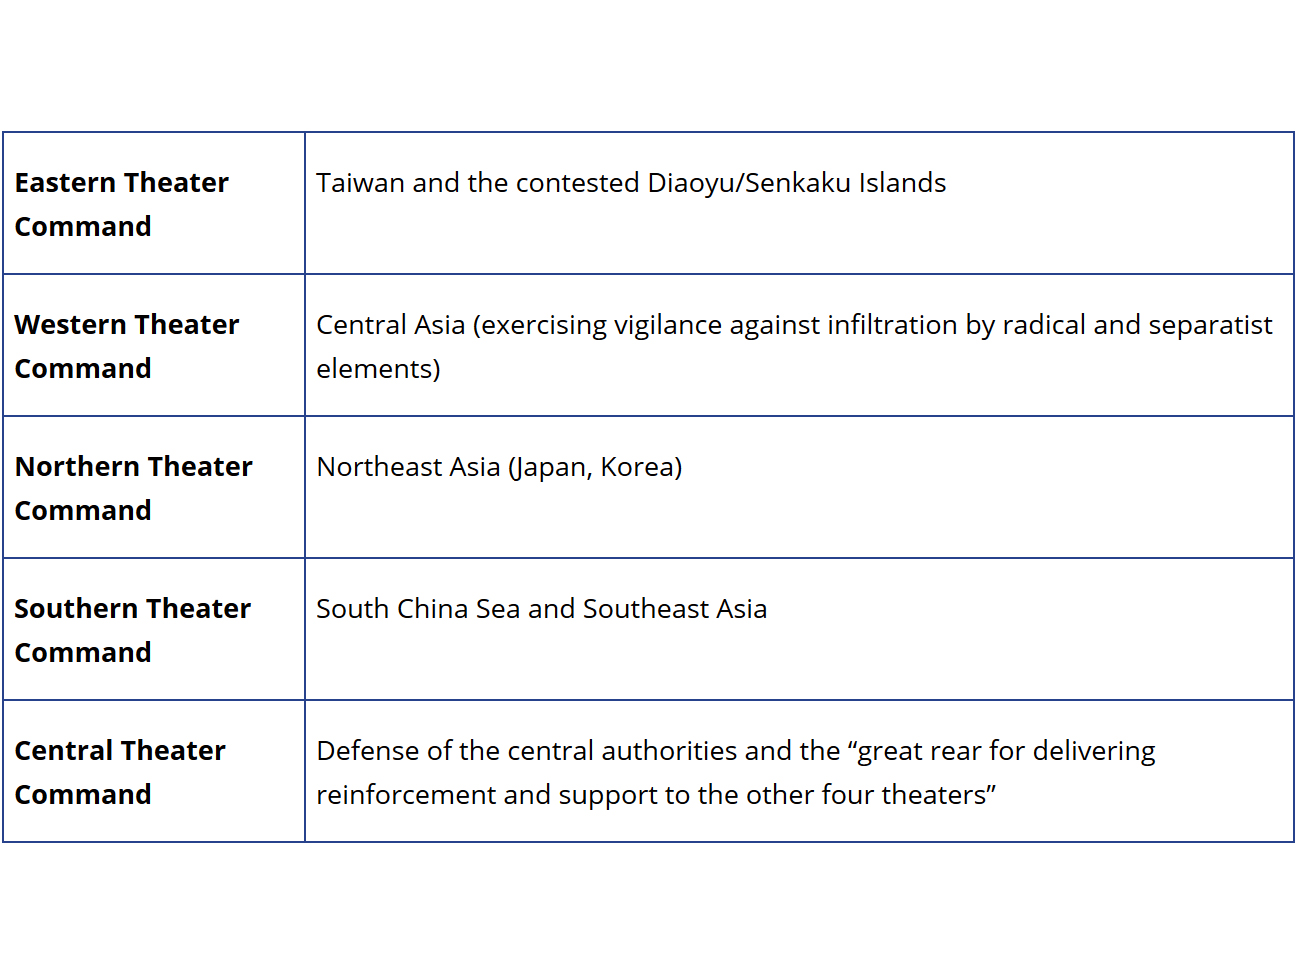 Enlarged view: China's areas of commands and responsibilities, courtesy FPRI